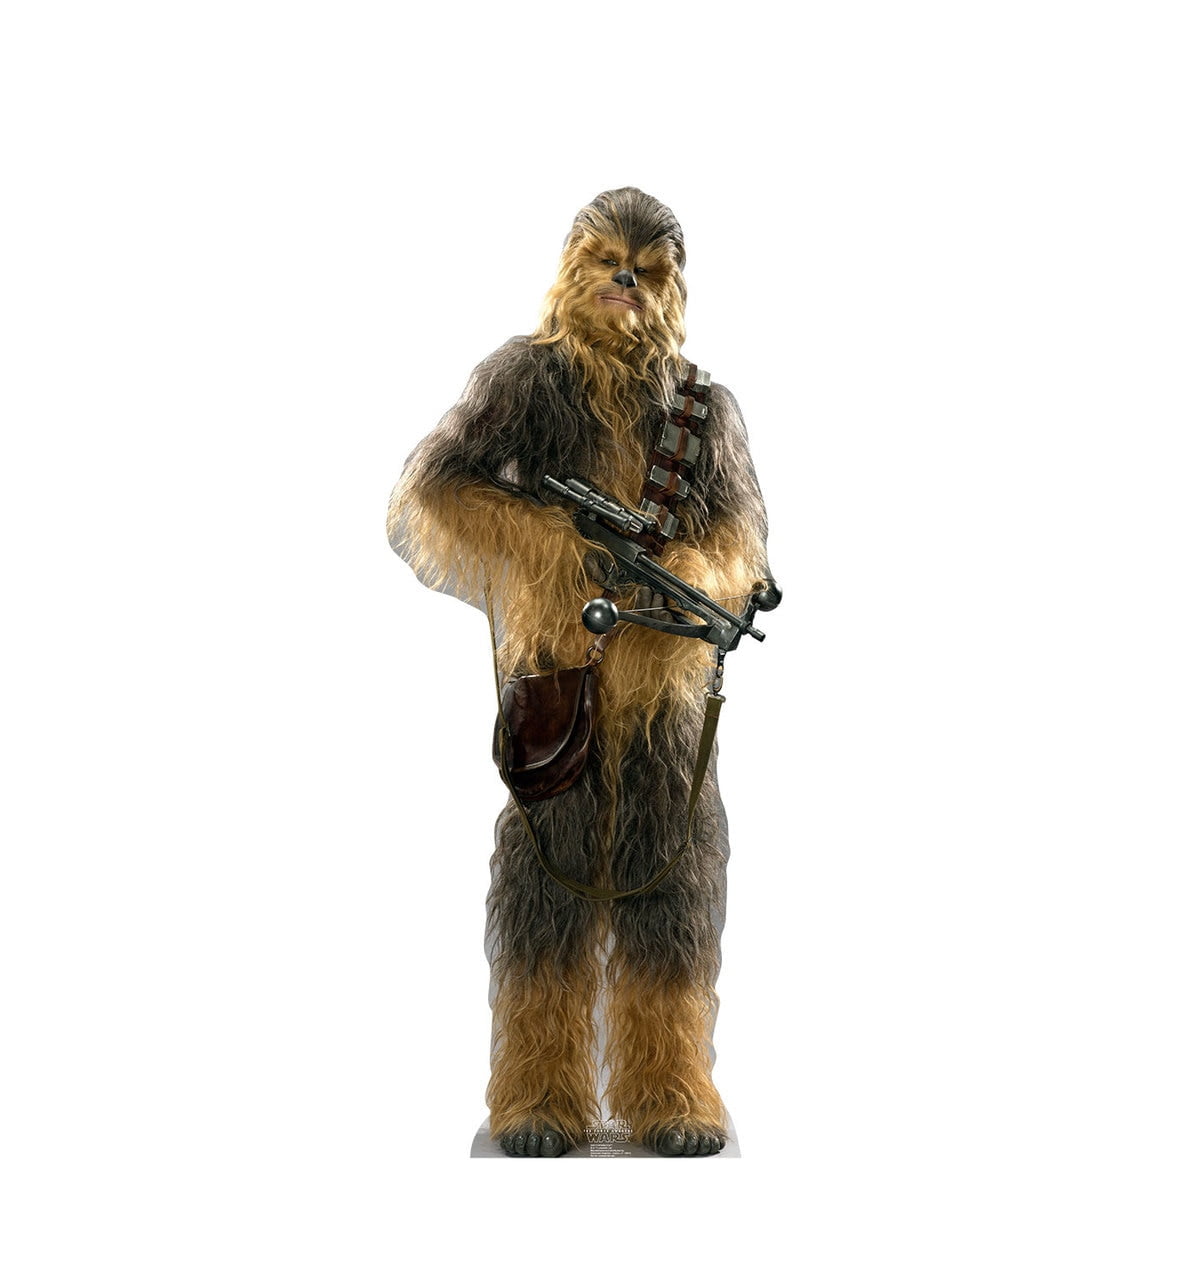 Picture of Advanced Graphics 2042 88 x 36 in. Chewbacca Cardboard Cutout, Star Wars VII - The Force Awakens